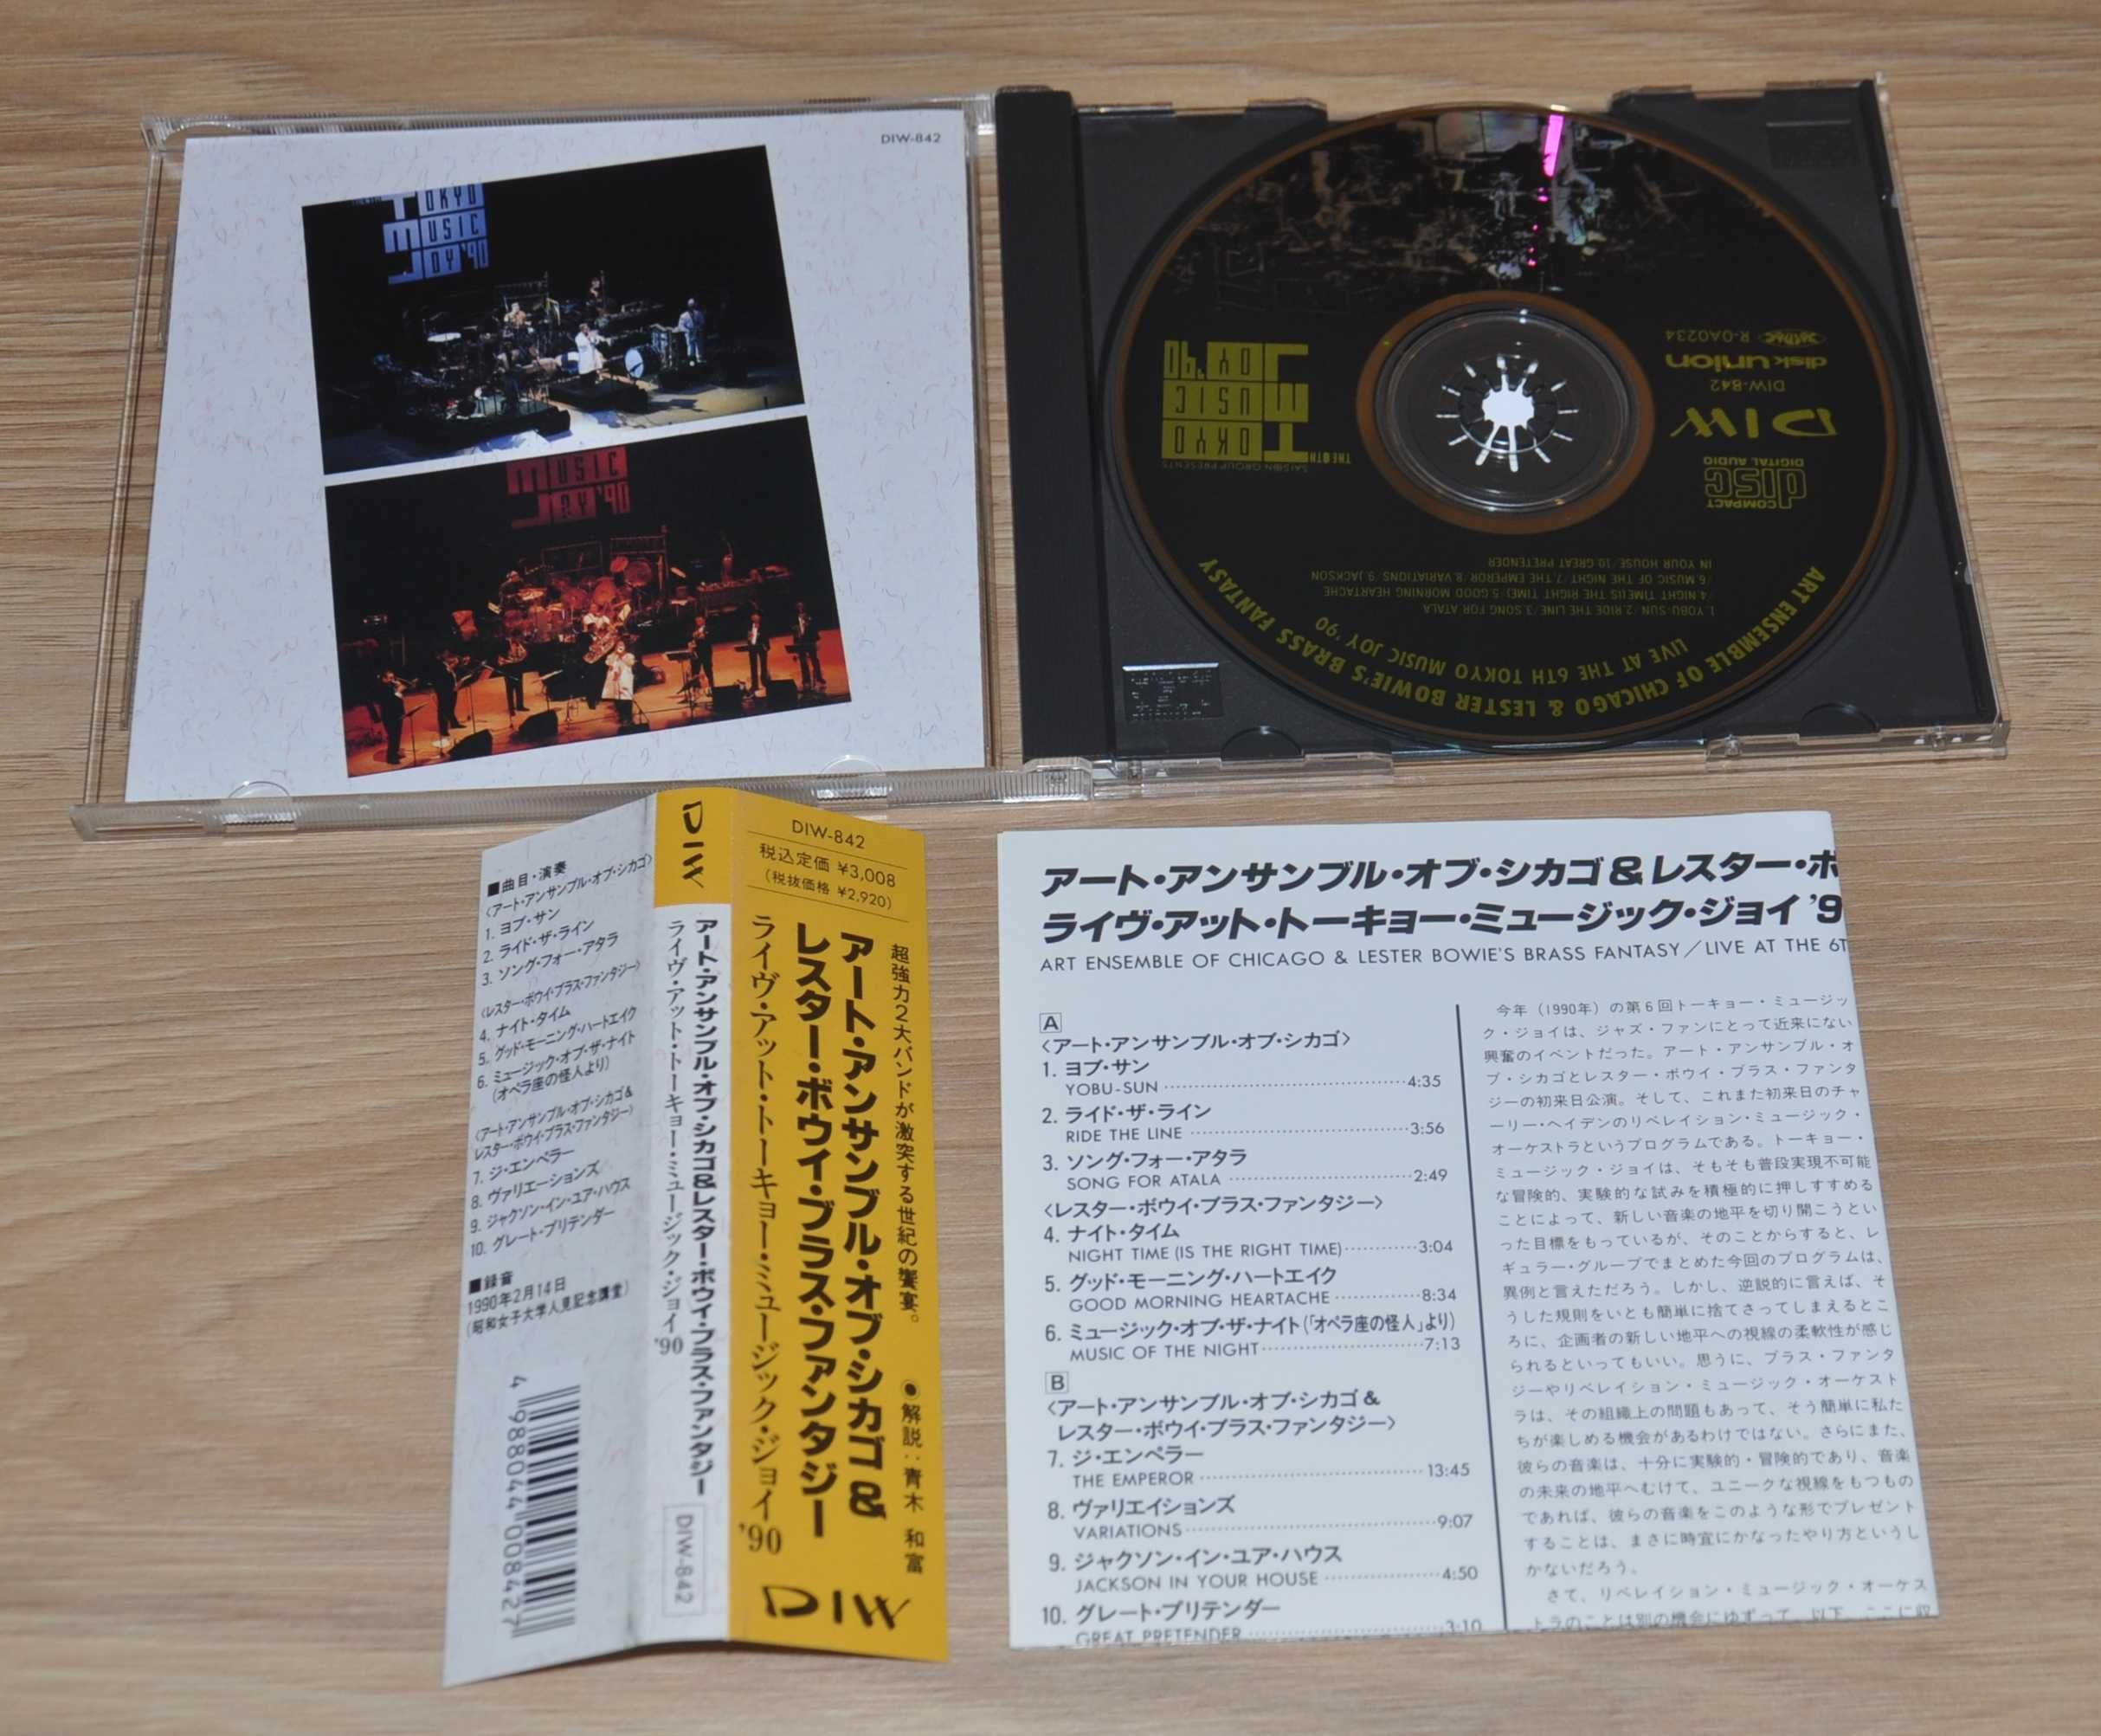 ART ENSEMBLE OF CHICAGO - Live At The 6th Tokyo Music - JAPAN CD jazz